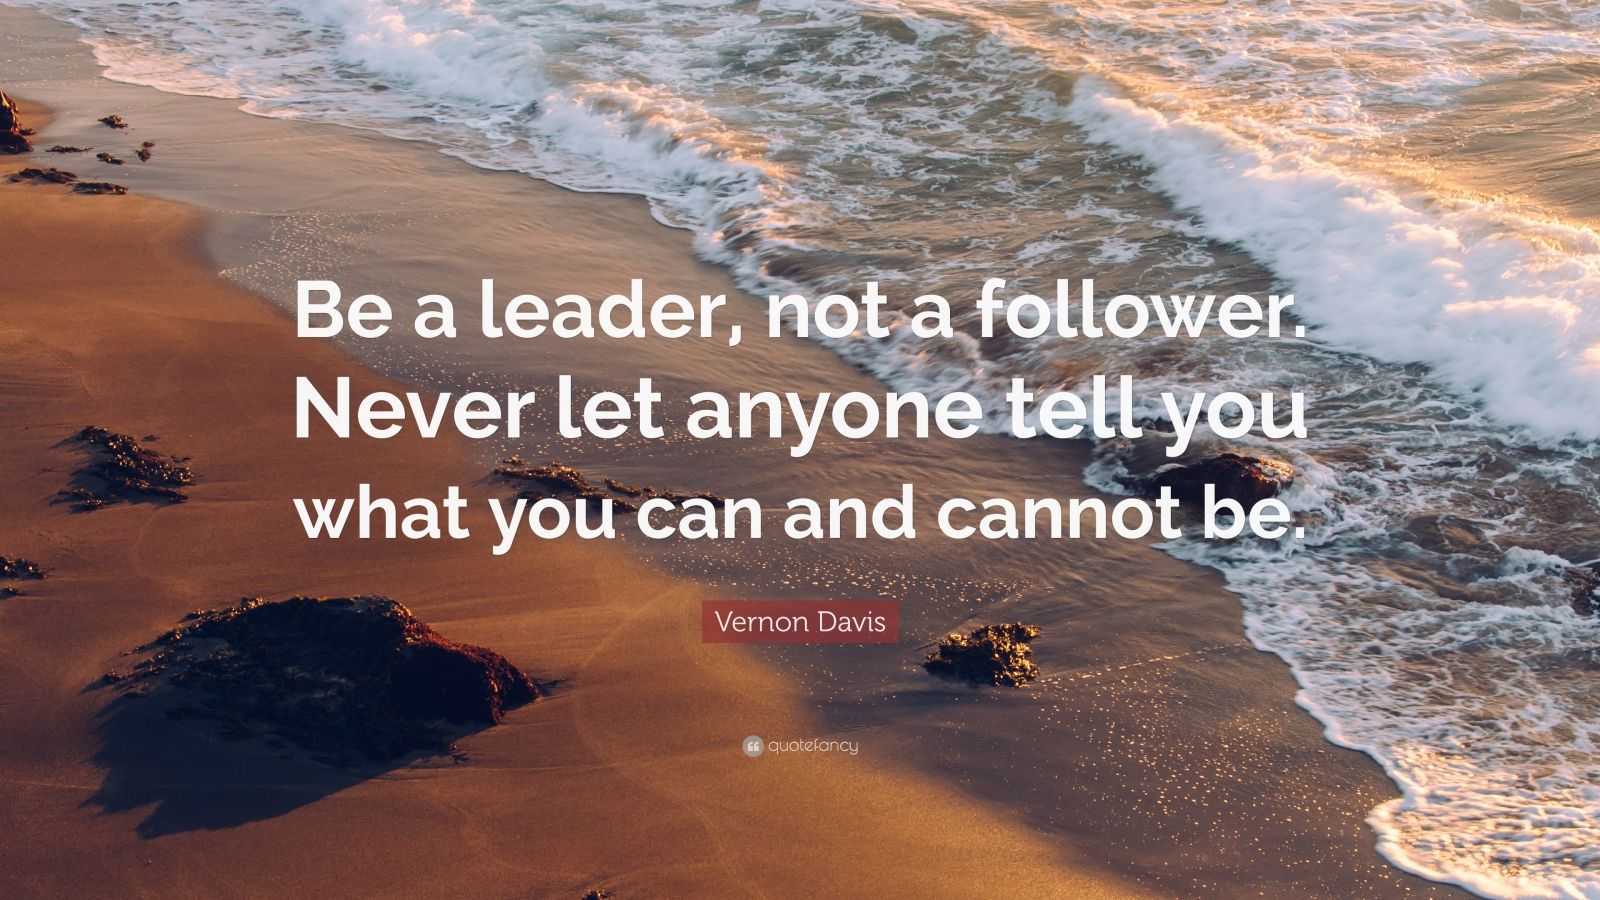 Vernon Davis Quote: “Be a leader, not a follower. Never let anyone tell